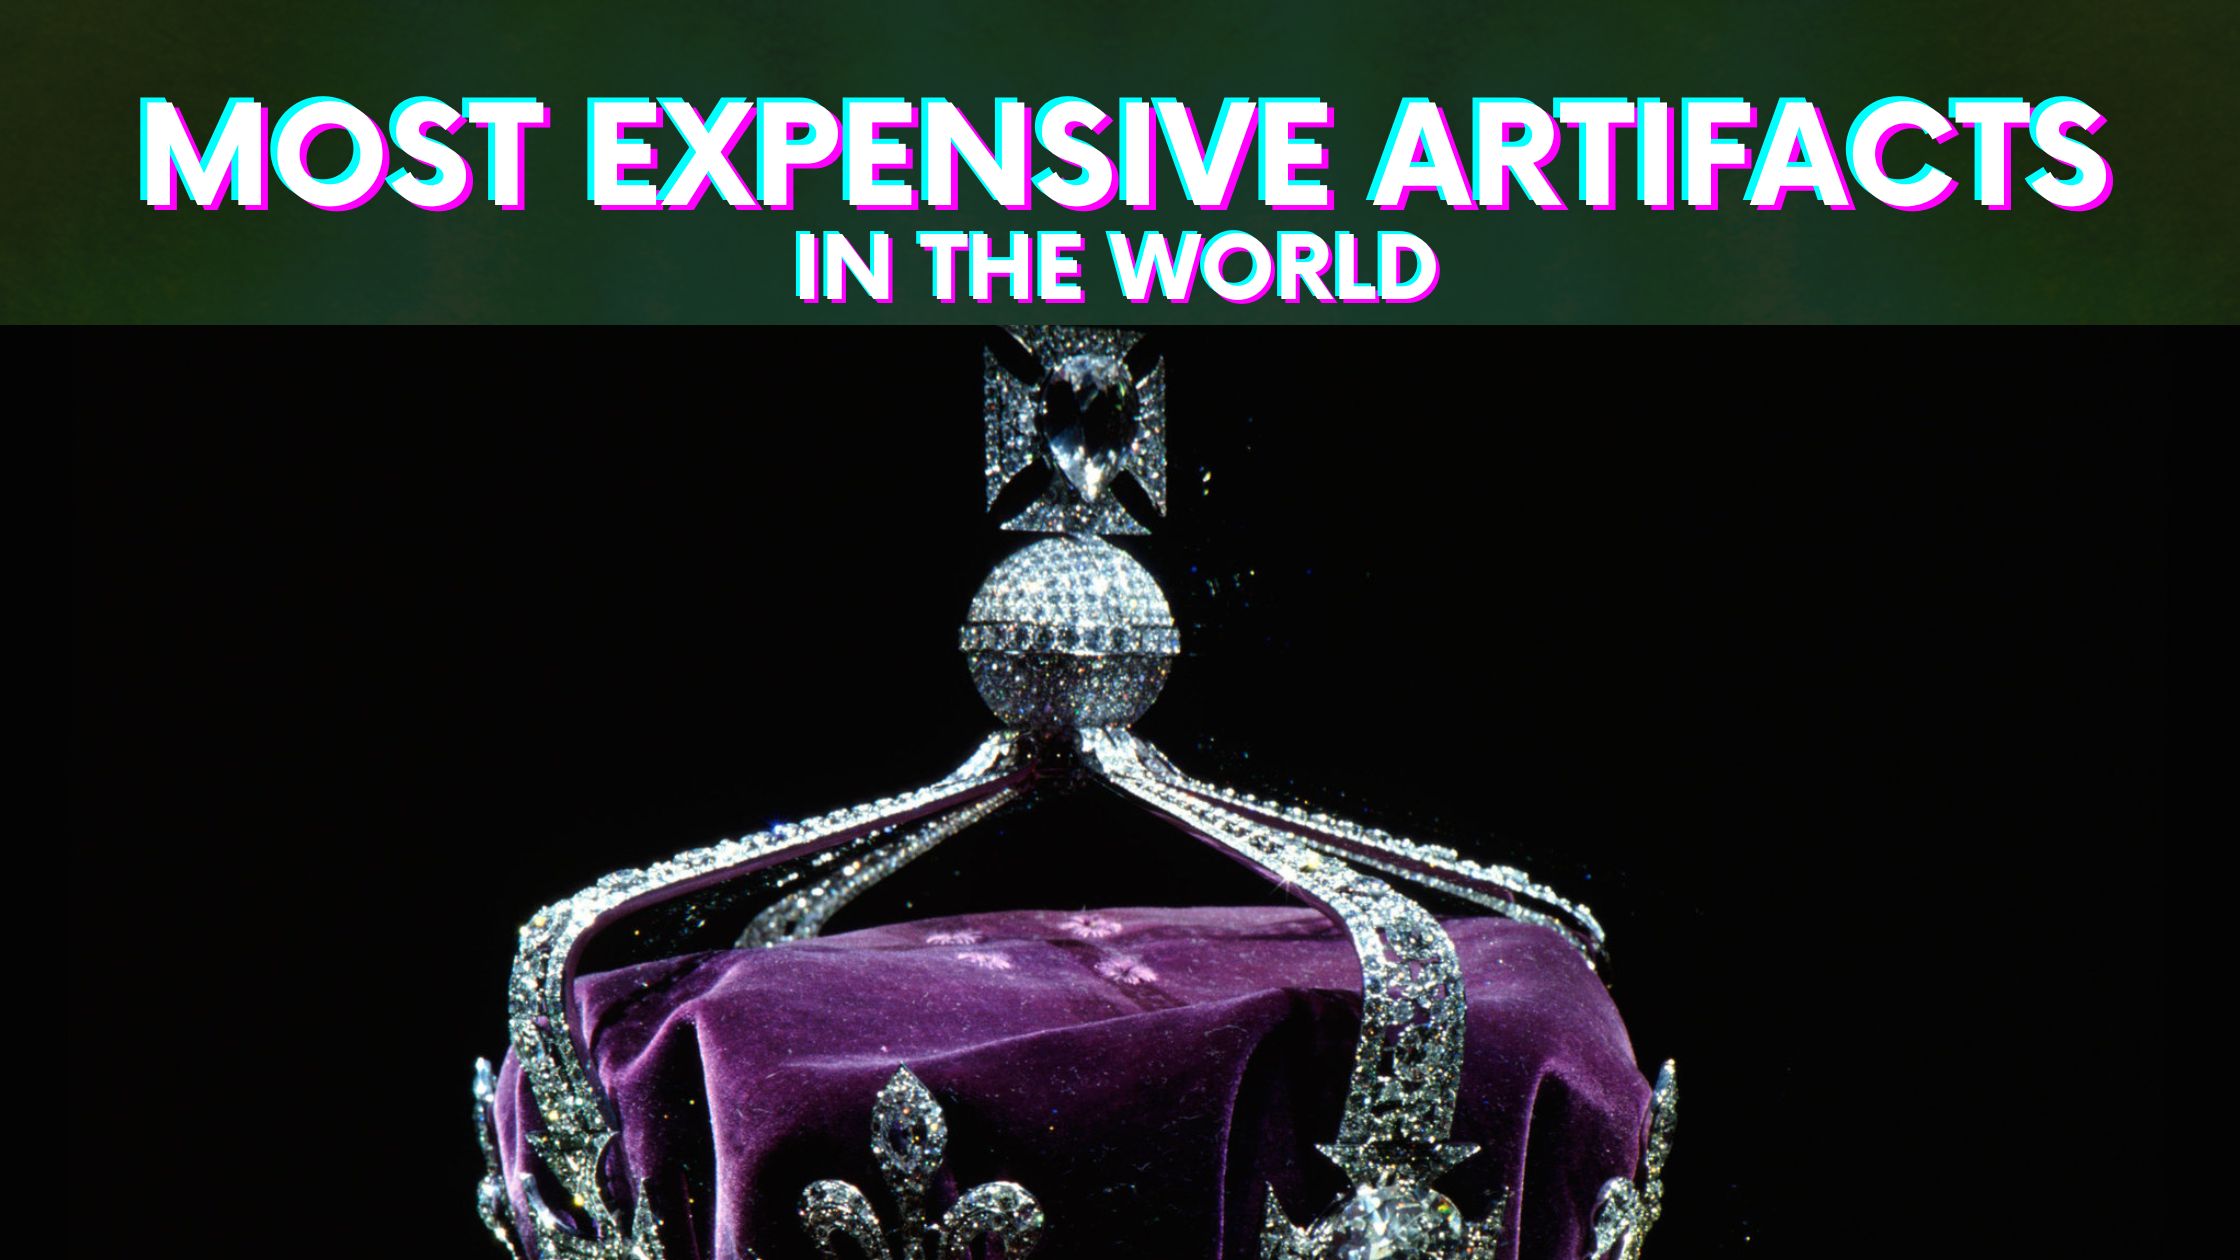 Top 10 Most Expensive Artifacts In The World